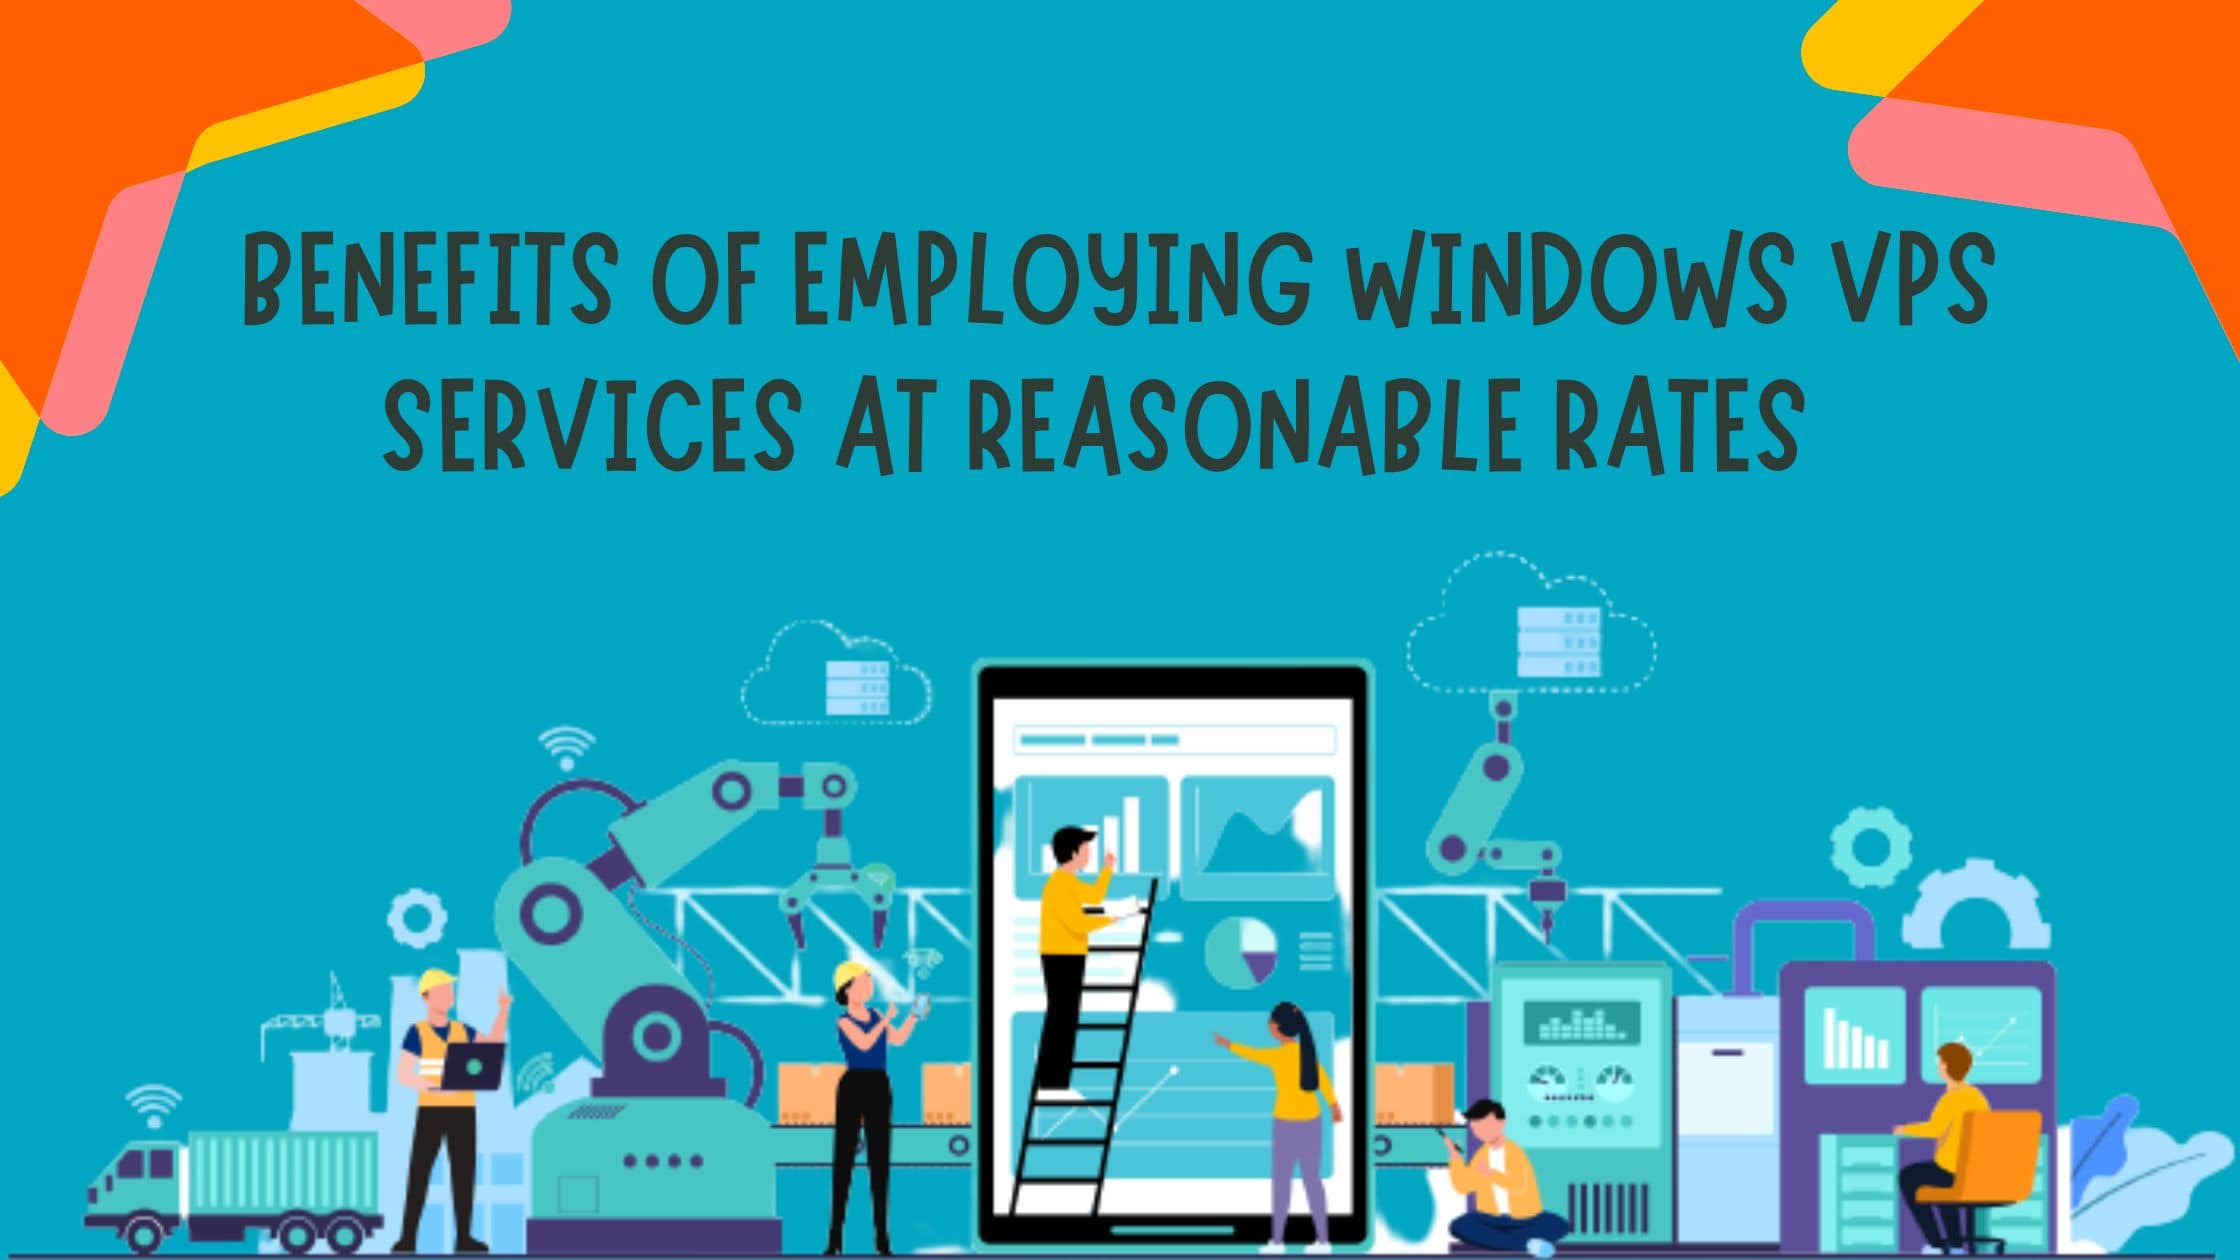 Benefits Of Employing Windows VPS Services At Reasonable Rates